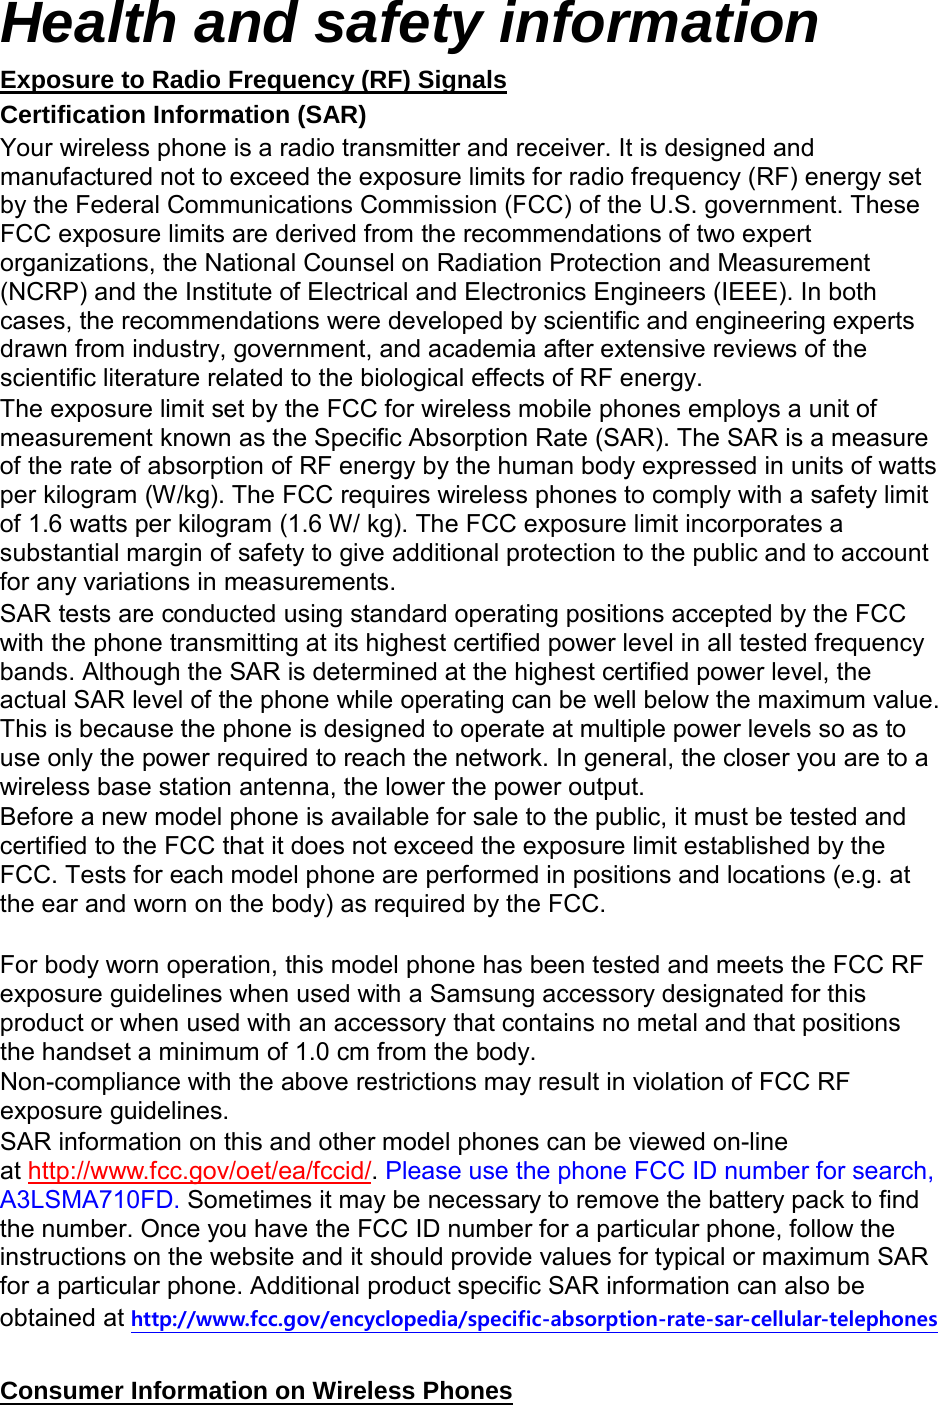 Health and safety information Certification Information (SAR) Exposure to Radio Frequency (RF) Signals Your wireless phone is a radio transmitter and receiver. It is designed and manufactured not to exceed the exposure limits for radio frequency (RF) energy set by the Federal Communications Commission (FCC) of the U.S. government. These FCC exposure limits are derived from the recommendations of two expert organizations, the National Counsel on Radiation Protection and Measurement (NCRP) and the Institute of Electrical and Electronics Engineers (IEEE). In both cases, the recommendations were developed by scientific and engineering experts drawn from industry, government, and academia after extensive reviews of the scientific literature related to the biological effects of RF energy. The exposure limit set by the FCC for wireless mobile phones employs a unit of measurement known as the Specific Absorption Rate (SAR). The SAR is a measure of the rate of absorption of RF energy by the human body expressed in units of watts per kilogram (W/kg). The FCC requires wireless phones to comply with a safety limit of 1.6 watts per kilogram (1.6 W/ kg). The FCC exposure limit incorporates a substantial margin of safety to give additional protection to the public and to account for any variations in measurements. SAR tests are conducted using standard operating positions accepted by the FCC with the phone transmitting at its highest certified power level in all tested frequency bands. Although the SAR is determined at the highest certified power level, the actual SAR level of the phone while operating can be well below the maximum value. This is because the phone is designed to operate at multiple power levels so as to use only the power required to reach the network. In general, the closer you are to a wireless base station antenna, the lower the power output. Before a new model phone is available for sale to the public, it must be tested and certified to the FCC that it does not exceed the exposure limit established by the FCC. Tests for each model phone are performed in positions and locations (e.g. at the ear and worn on the body) as required by the FCC.      For body worn operation, this model phone has been tested and meets the FCC RF exposure guidelines when used with a Samsung accessory designated for this product or when used with an accessory that contains no metal and that positions the handset a minimum of 1.0 cm from the body.   Non-compliance with the above restrictions may result in violation of FCC RF exposure guidelines. SAR information on this and other model phones can be viewed on-line at http://www.fcc.gov/oet/ea/fccid/. Please use the phone FCC ID number for search, A3LSMA710FD. Sometimes it may be necessary to remove the battery pack to find the number. Once you have the FCC ID number for a particular phone, follow the instructions on the website and it should provide values for typical or maximum SAR for a particular phone. Additional product specific SAR information can also be obtained at http://www.fcc.gov/encyclopedia/specific-absorption-rate-sar-cellular-telephones  Consumer Information on Wireless Phones 